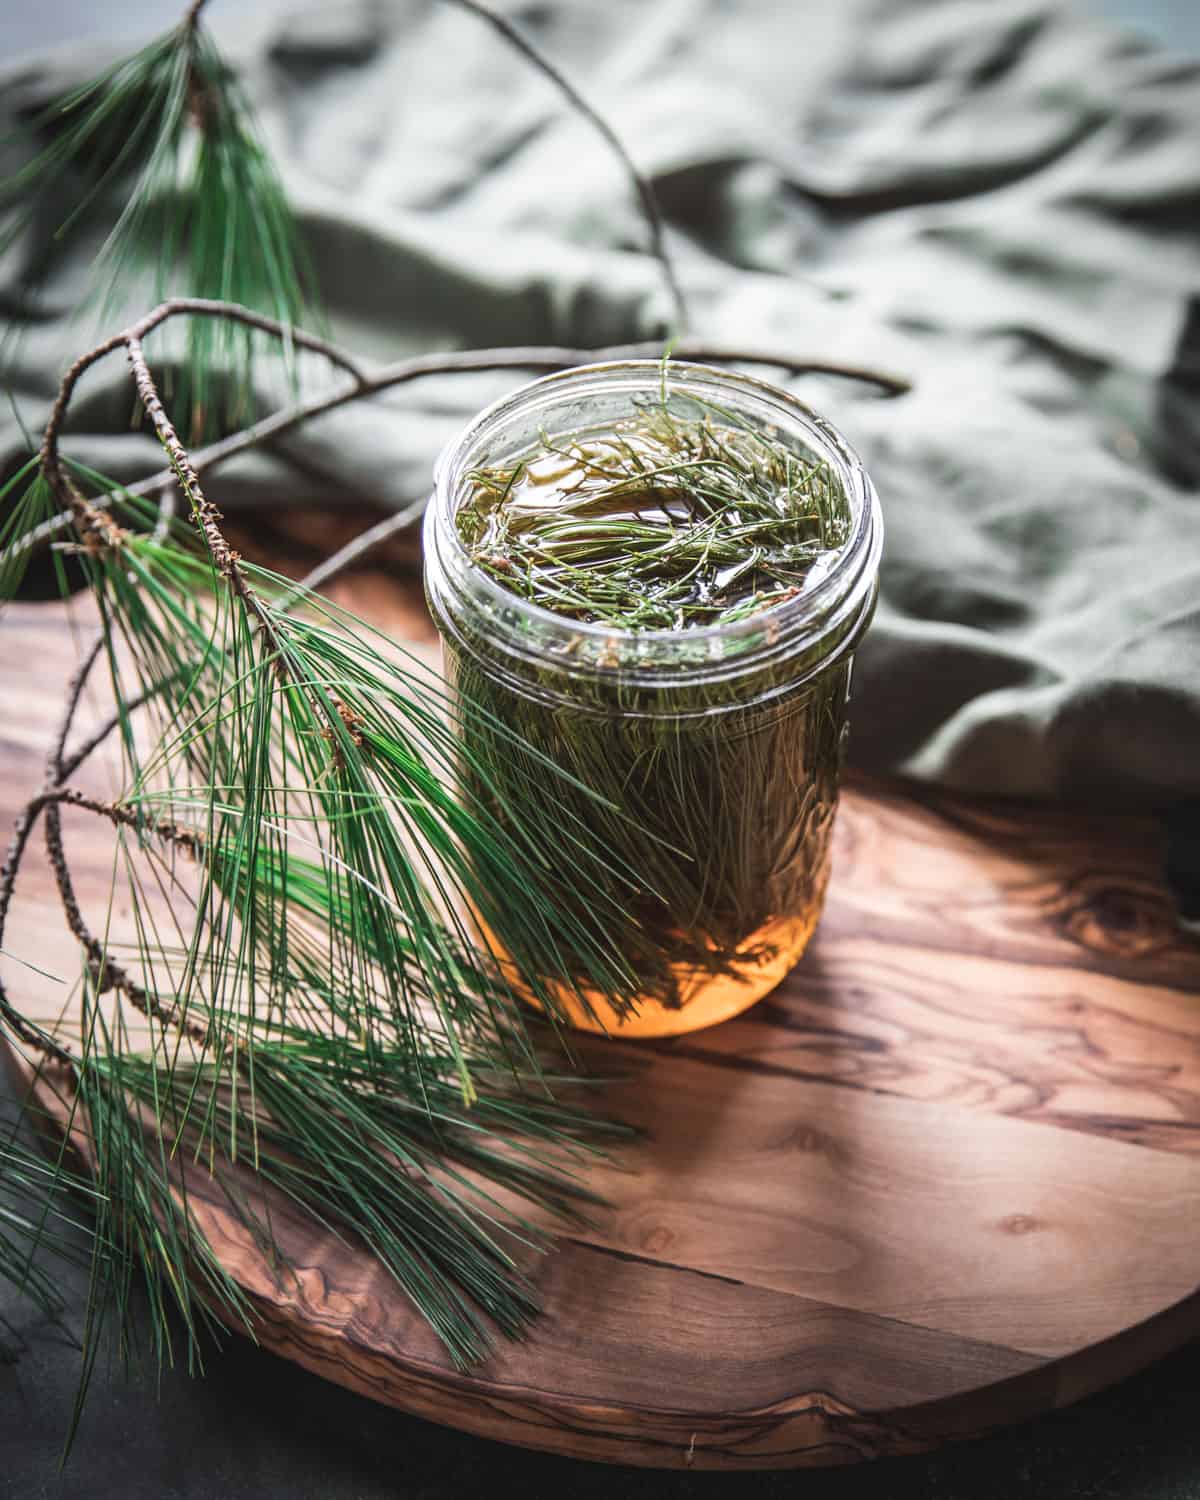 A jar filled with pine needles and honey surrounded by fresh pine needles.